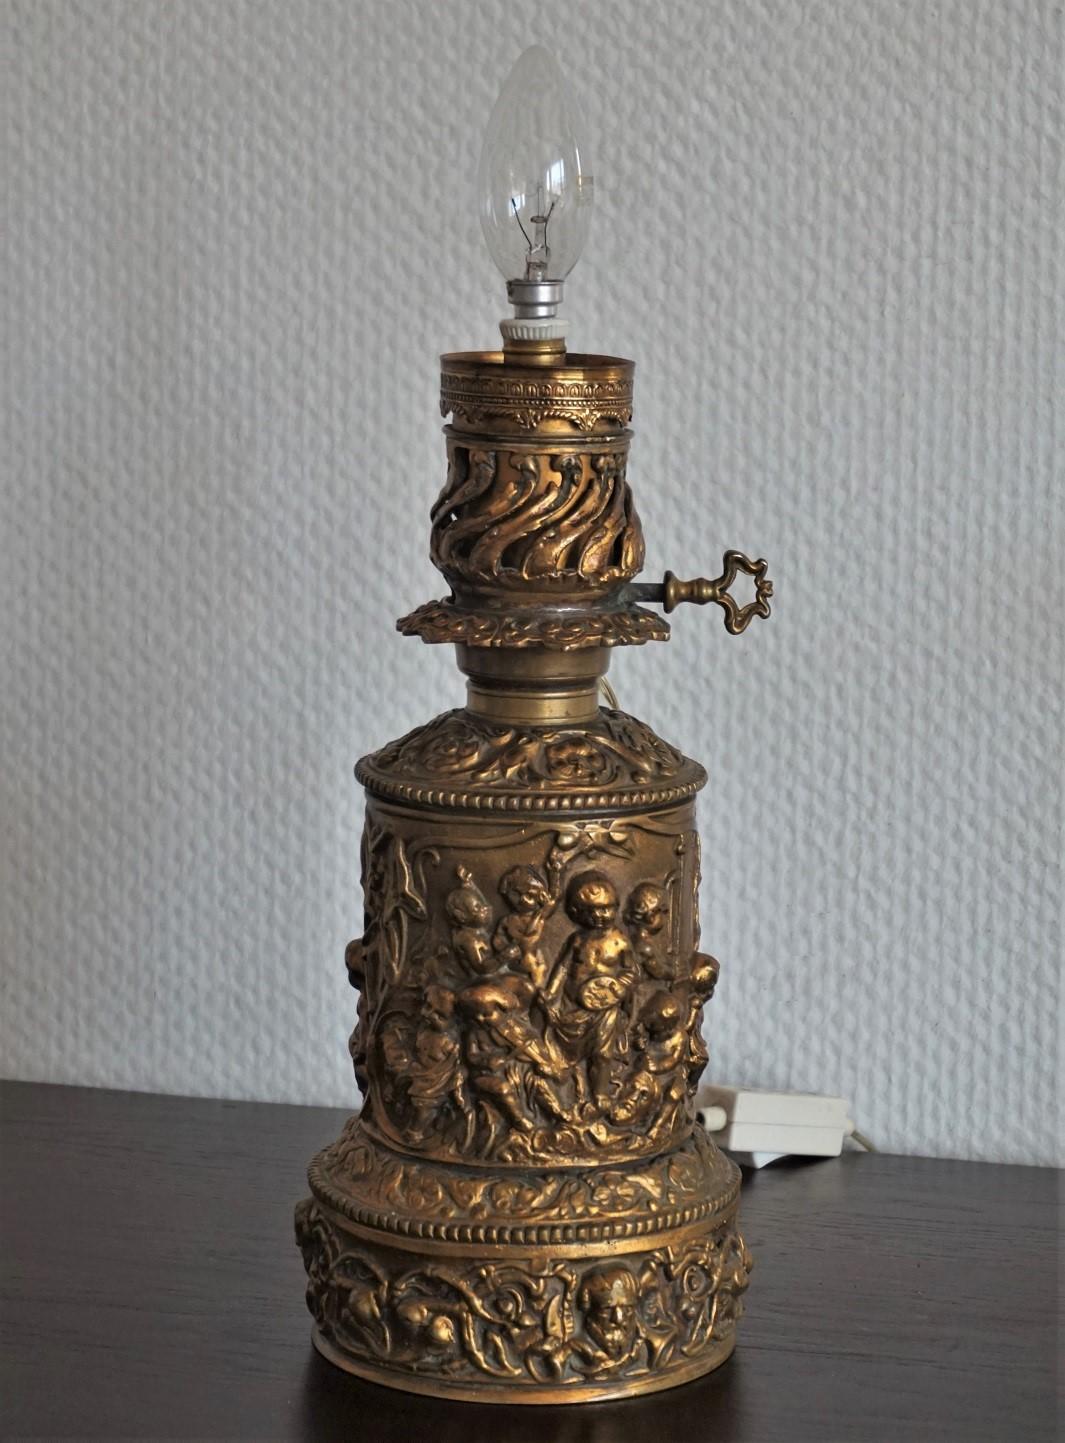 Etched 19th Century Victorian Gilt Bronze Oil Lamp Converted to Electric, Table Lamp